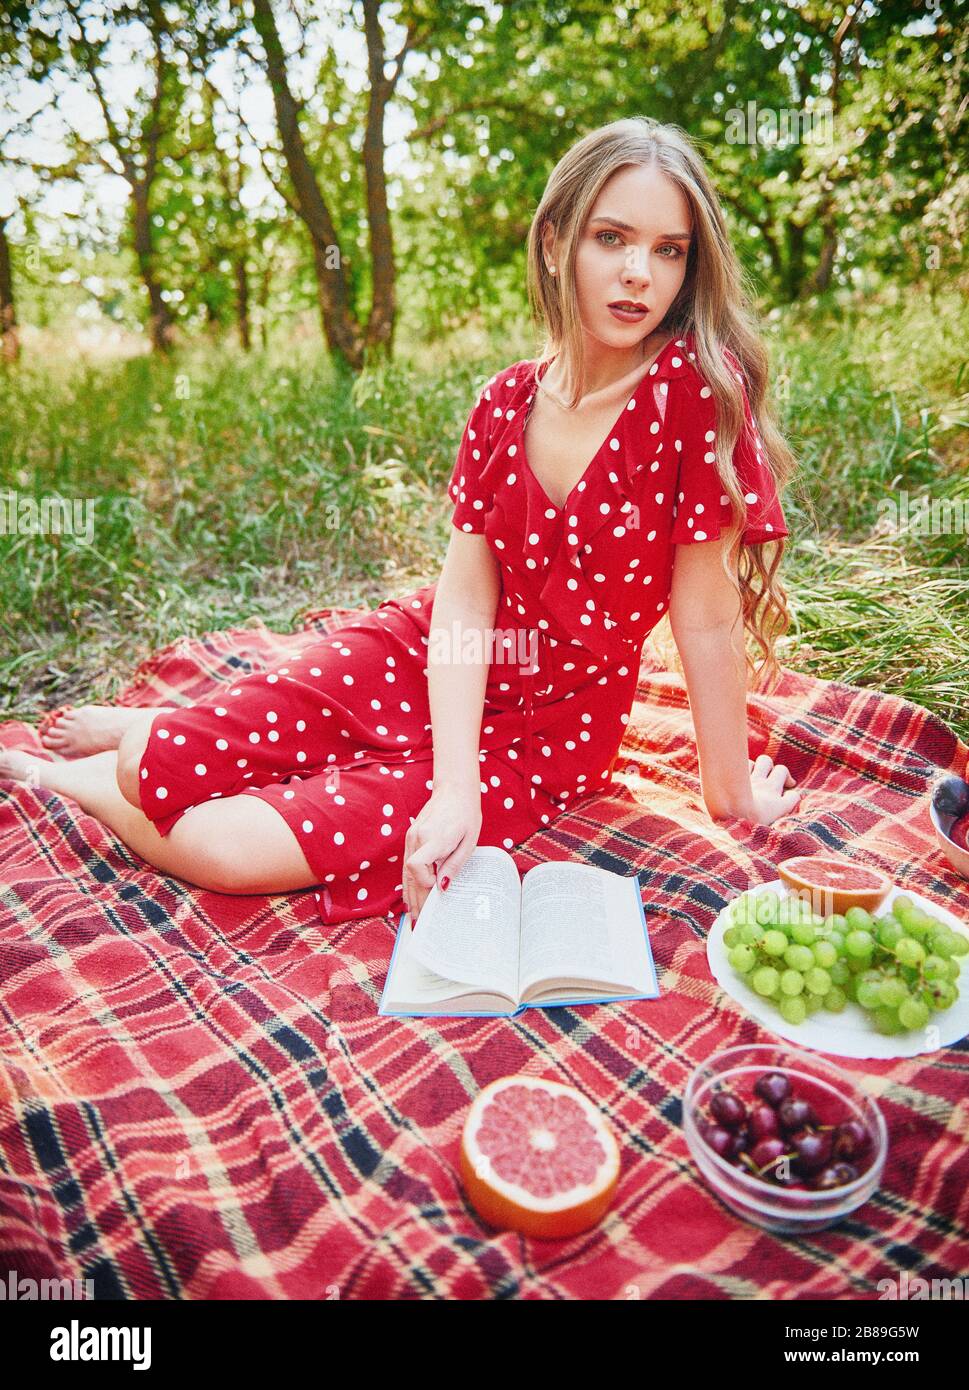 Picnic scene: cute girl sitting on a plaid and reading book in grove. Outdoor portrait of beautiful young woman in red dress. Effect of vintage film w Stock Photo